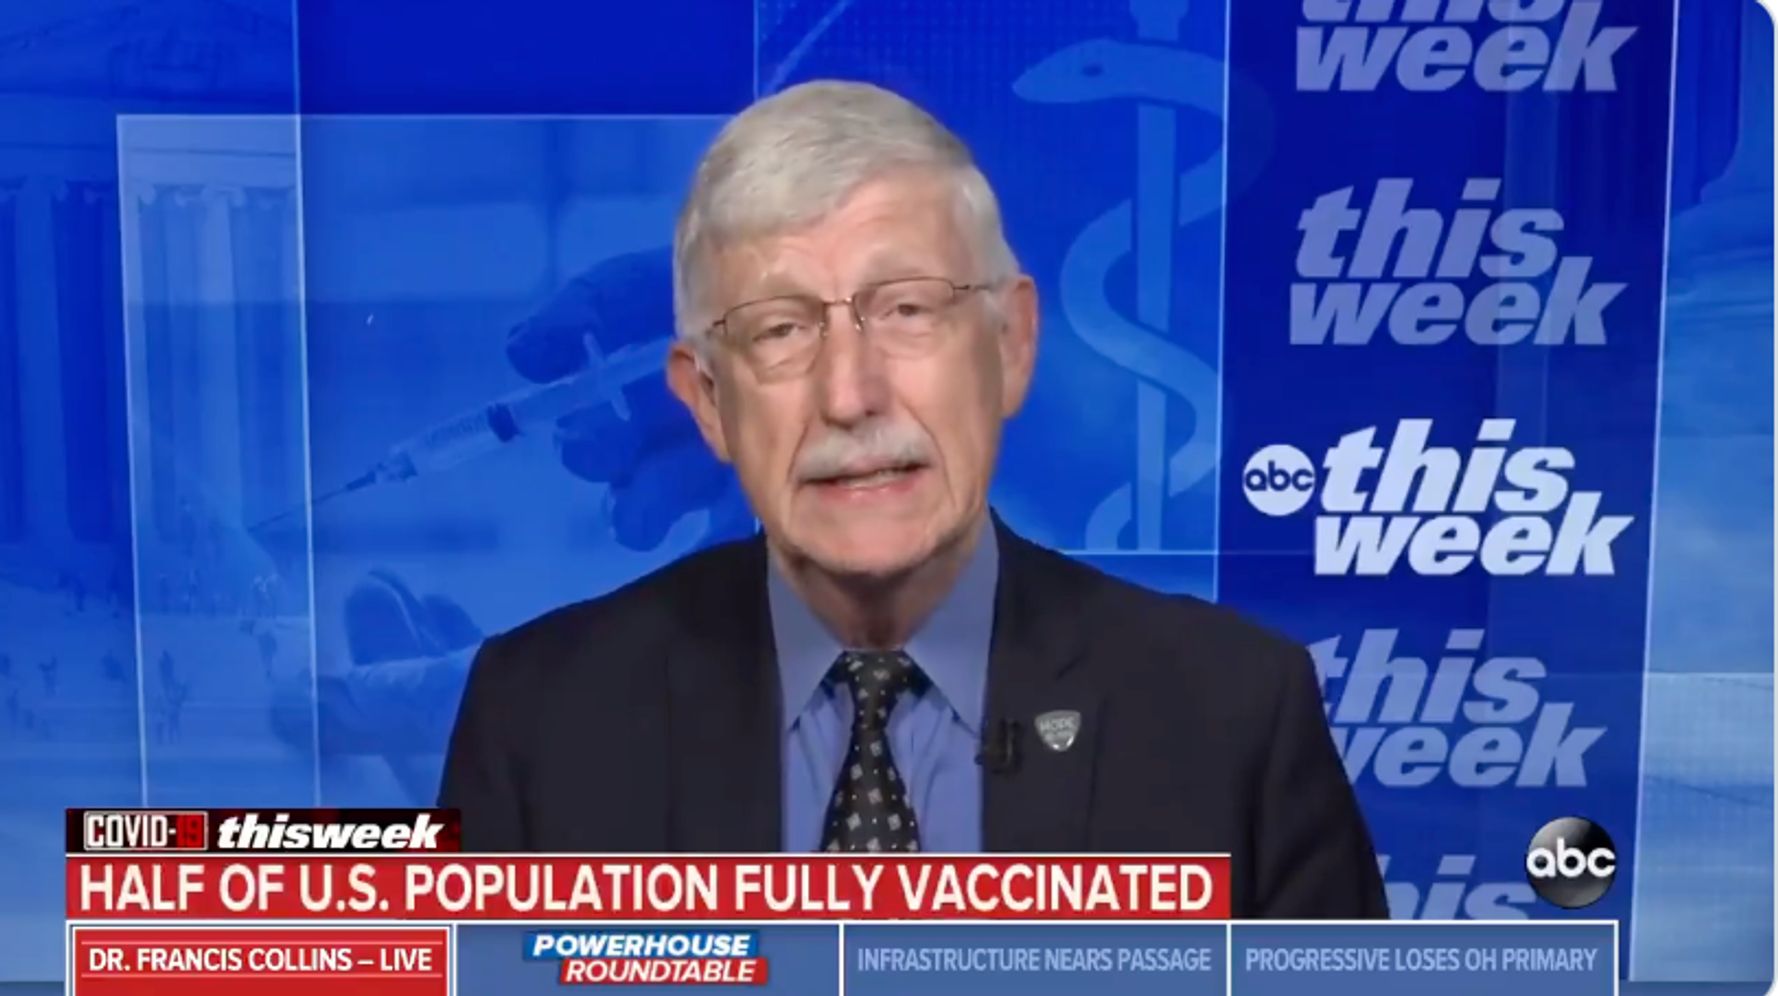 Top U.S. Health Official Calls For More Vaccine Mandates: 'People Are Dying'